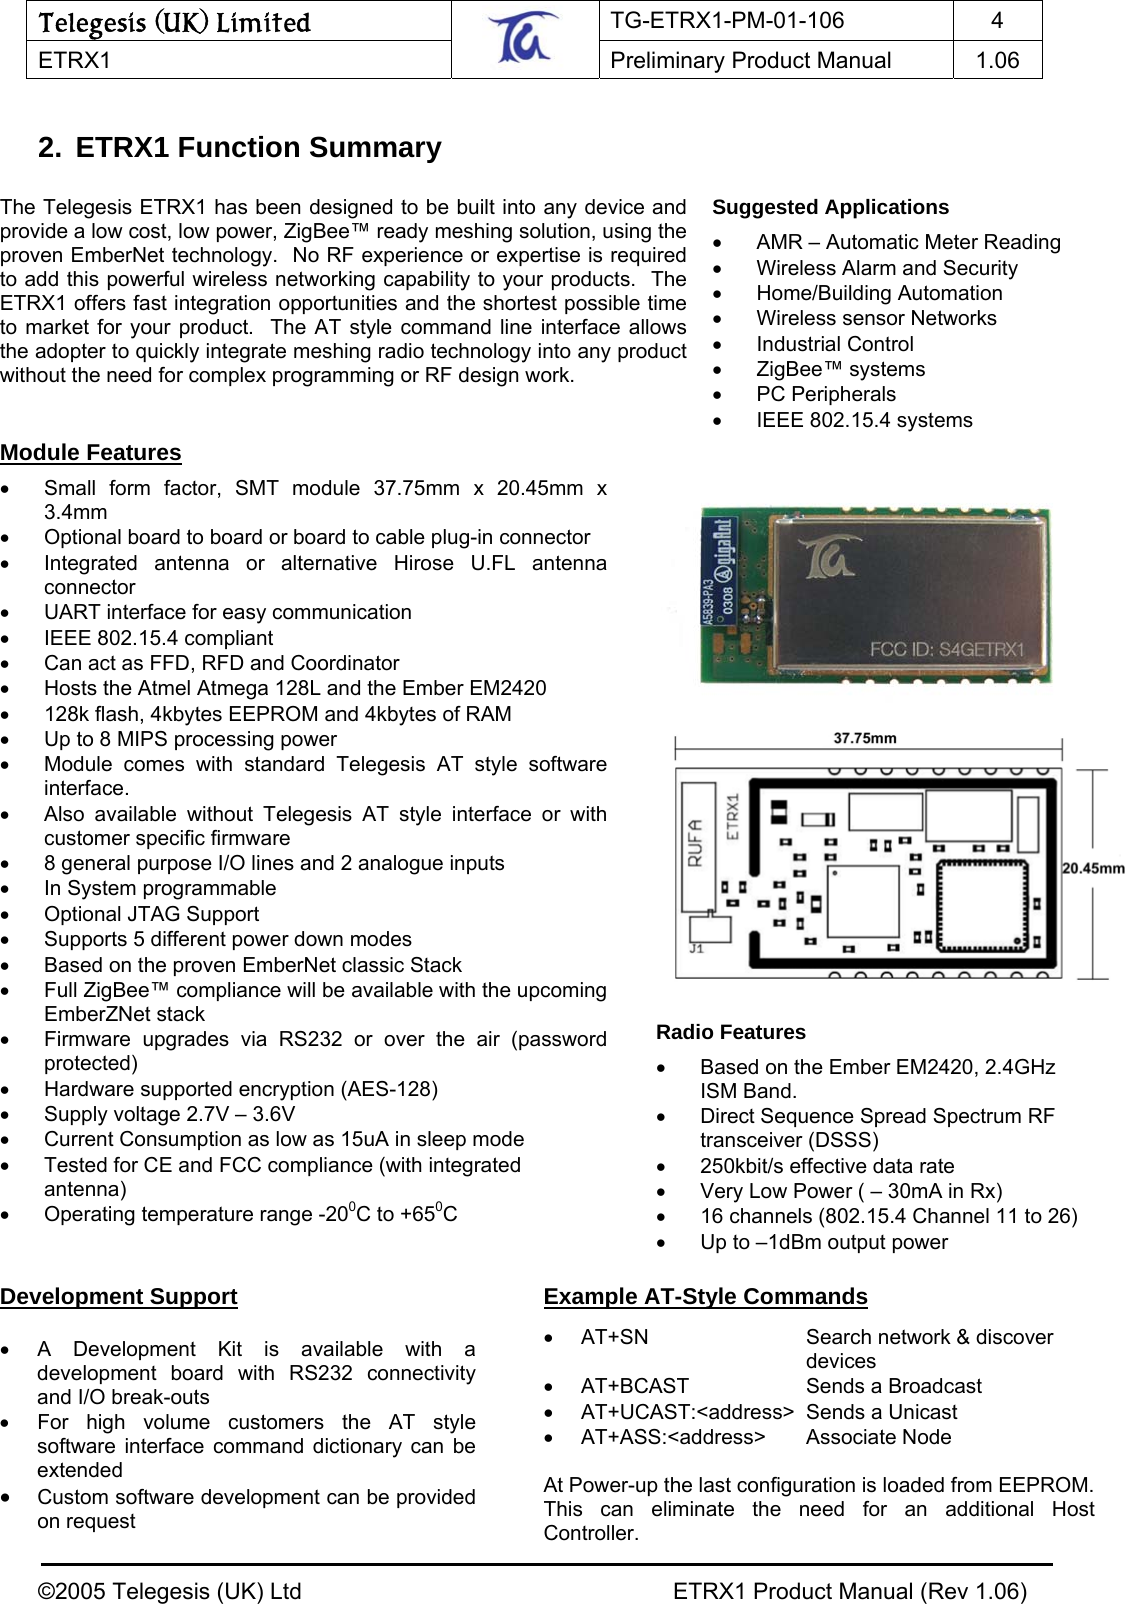 Telegesis (UK) Limited TG-ETRX1-PM-01-106 4  ETRX1    Preliminary Product Manual  1.06   2. ETRX1 Function Summary                                                     Module Features  •  Small form factor, SMT module 37.75mm x 20.45mm x 3.4mm  •  Optional board to board or board to cable plug-in connector •  Integrated antenna or alternative Hirose U.FL antenna connector •  UART interface for easy communication •  IEEE 802.15.4 compliant •  Can act as FFD, RFD and Coordinator •  Hosts the Atmel Atmega 128L and the Ember EM2420  •  128k flash, 4kbytes EEPROM and 4kbytes of RAM •  Up to 8 MIPS processing power •  Module comes with standard Telegesis AT style software interface. • Also available without Telegesis AT style interface or with customer specific firmware  •  8 general purpose I/O lines and 2 analogue inputs •  In System programmable • Optional JTAG Support •  Supports 5 different power down modes •  Based on the proven EmberNet classic Stack •  Full ZigBee™ compliance will be available with the upcoming EmberZNet stack •  Firmware upgrades via RS232 or over the air (password protected) •  Hardware supported encryption (AES-128) •  Supply voltage 2.7V – 3.6V •  Current Consumption as low as 15uA in sleep mode •  Tested for CE and FCC compliance (with integrated antenna) •  Operating temperature range -200C to +650C Suggested Applications  •  AMR – Automatic Meter Reading •  Wireless Alarm and Security  • Home/Building Automation • Wireless sensor Networks • Industrial Control • ZigBee™ systems • PC Peripherals •  IEEE 802.15.4 systems The Telegesis ETRX1 has been designed to be built into any device and provide a low cost, low power, ZigBee™ ready meshing solution, using the proven EmberNet technology.  No RF experience or expertise is requiredto add this powerful wireless networking capability to your products.  The ETRX1 offers fast integration opportunities and the shortest possible time to market for your product.  The AT style command line interface allows the adopter to quickly integrate meshing radio technology into any product without the need for complex programming or RF design work. Example AT-Style Commands  •  AT+SN  Search network &amp; discover  devices •  AT+BCAST  Sends a Broadcast  • AT+UCAST:&lt;address&gt; Sends a Unicast • AT+ASS:&lt;address&gt;  Associate Node  At Power-up the last configuration is loaded from EEPROM. This can eliminate the need for an additional Host Controller. Radio Features  •  Based on the Ember EM2420, 2.4GHz ISM Band. •  Direct Sequence Spread Spectrum RF transceiver (DSSS) •  250kbit/s effective data rate •  Very Low Power ( – 30mA in Rx) •  16 channels (802.15.4 Channel 11 to 26) •  Up to –1dBm output power  Development Support  • A Development Kit is available with a development board with RS232 connectivity and I/O break-outs •  For high volume customers the AT style software interface command dictionary can be extended • Custom software development can be provided on request ©2005 Telegesis (UK) Ltd    ETRX1 Product Manual (Rev 1.06) 